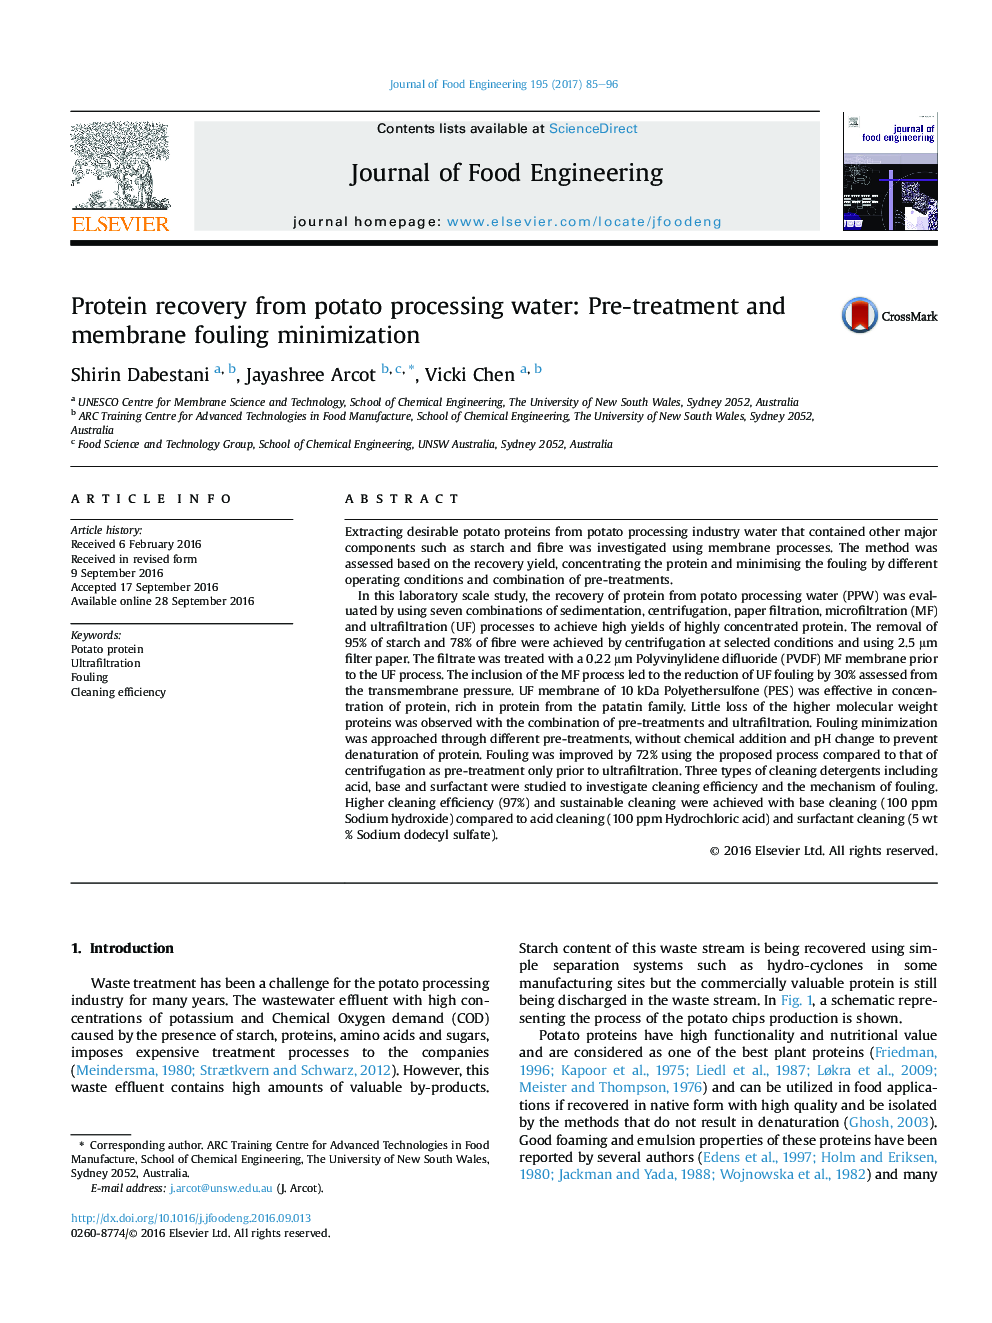 Protein recovery from potato processing water: Pre-treatment and membrane fouling minimization